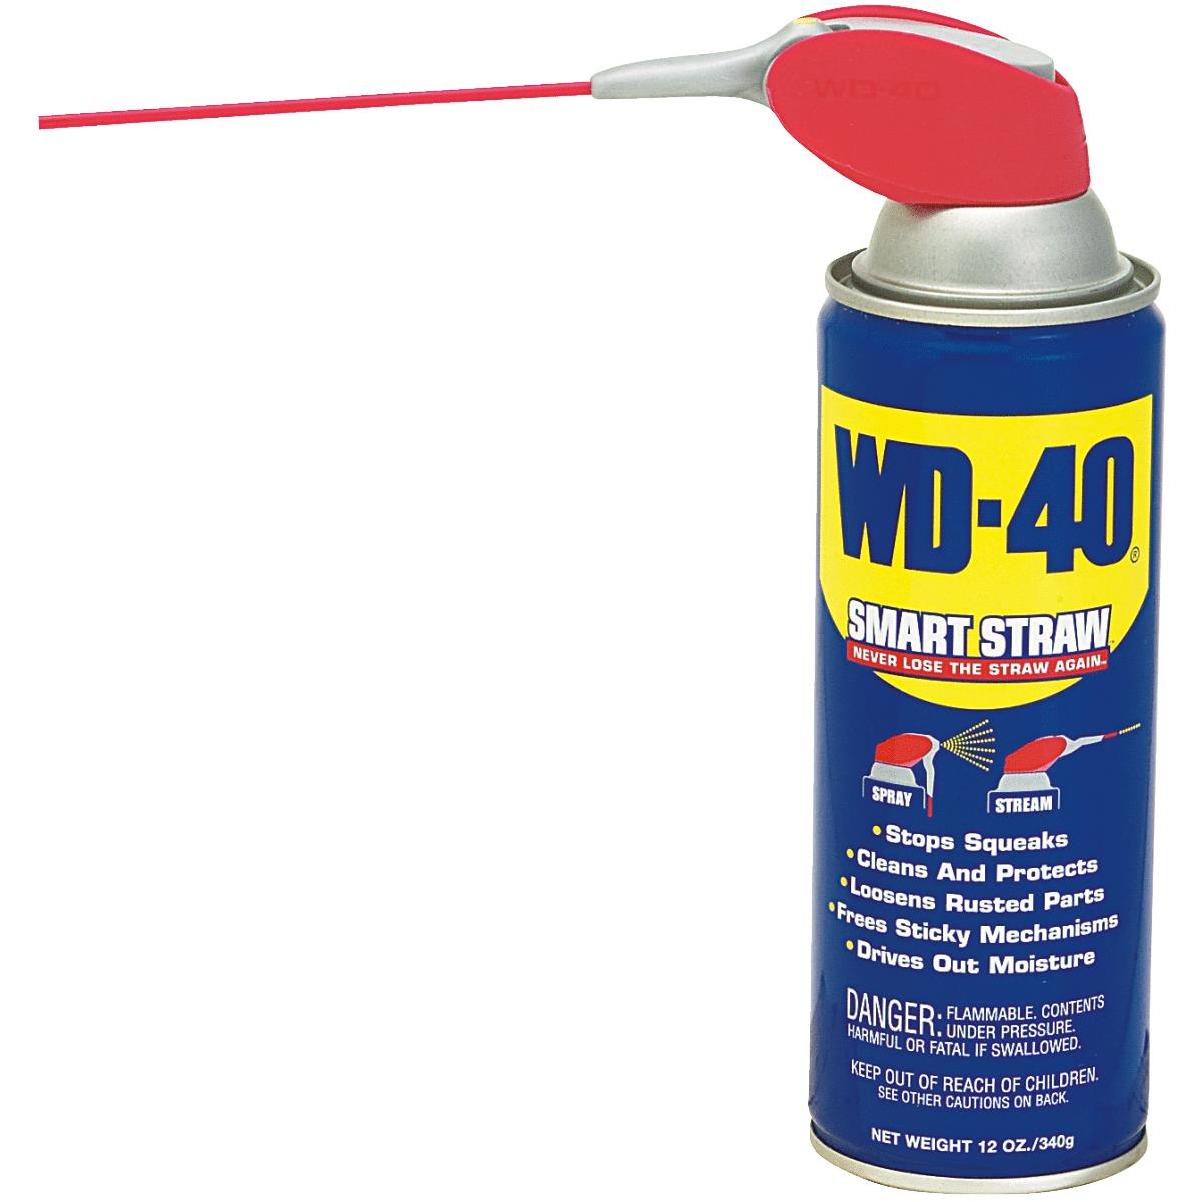 WD-40 3-In-One Professional Silicone Lubricant - 4 fl oz bottle